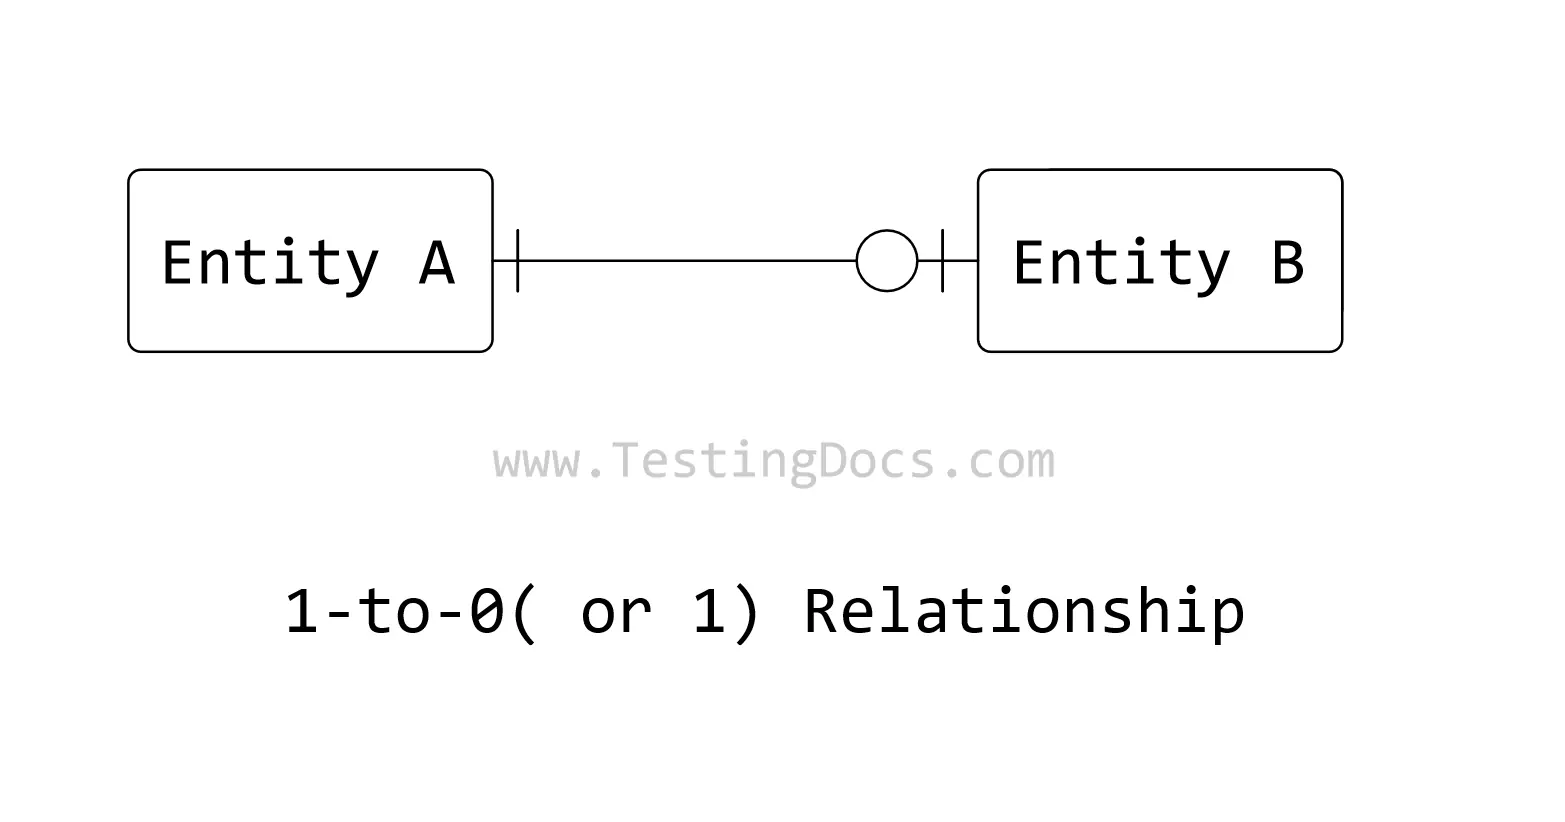 One to Zero or One Relationship